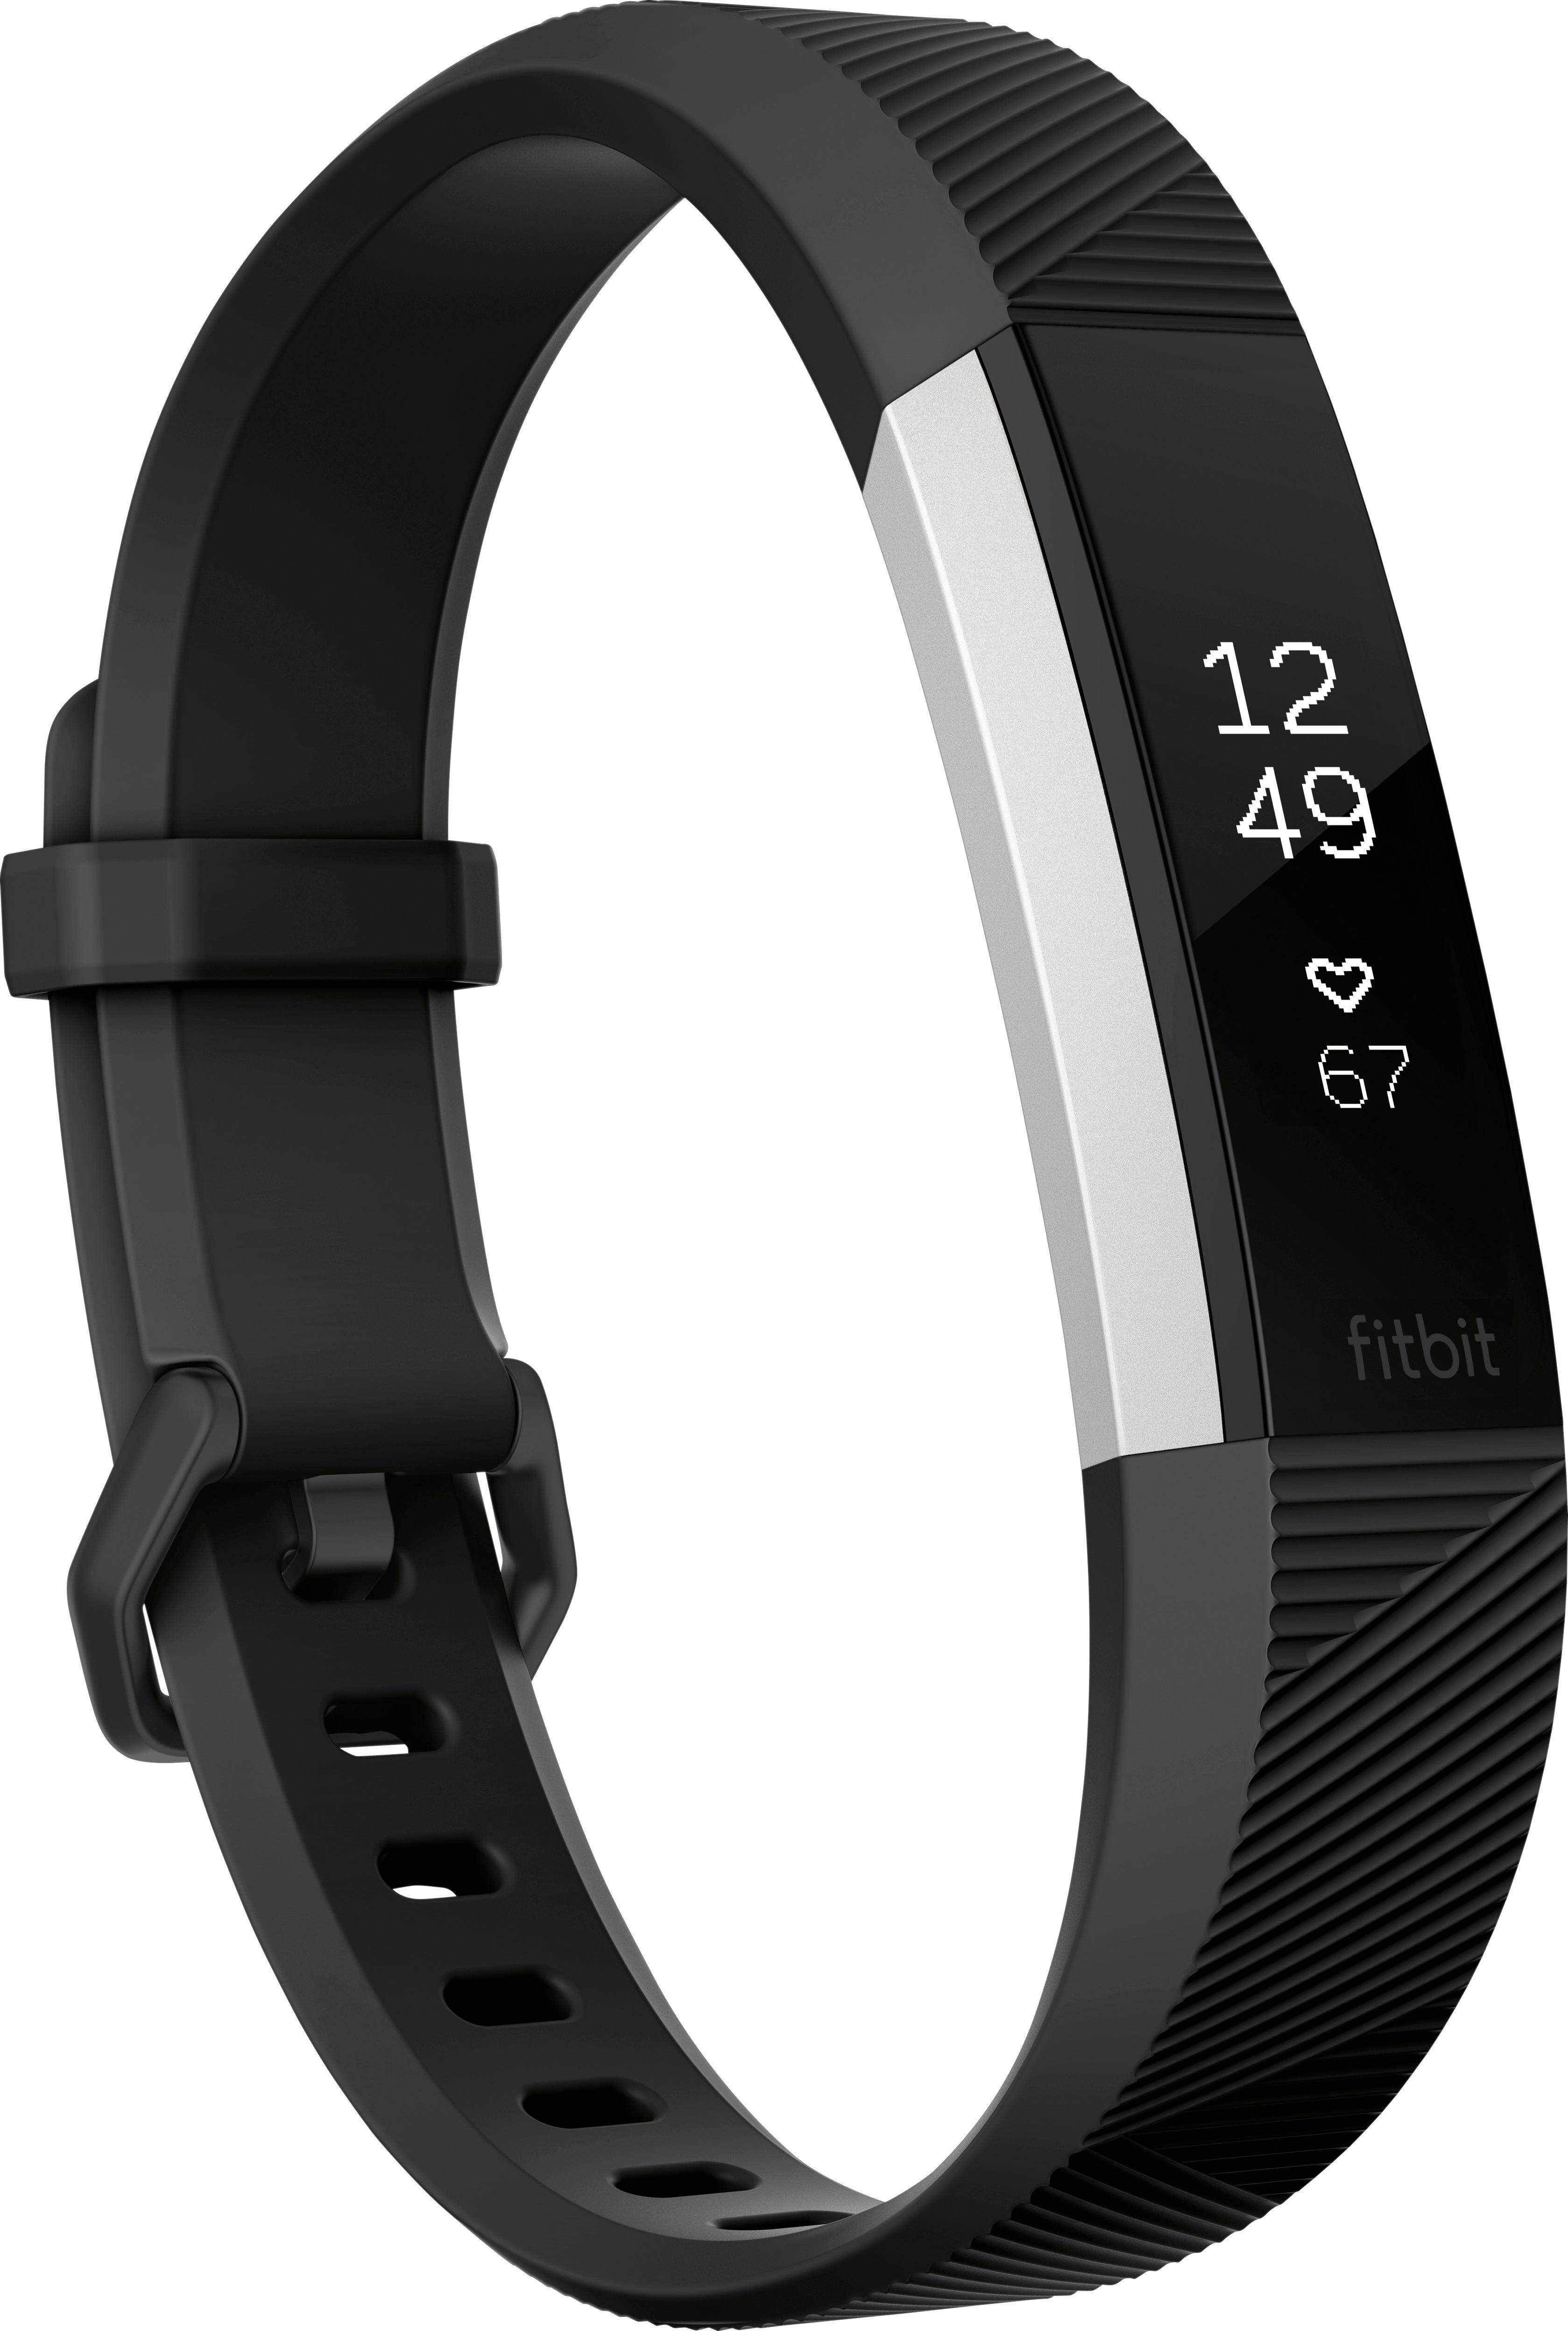 Black for sale online Small Fitbit Charge HR Wristband Activity Tracker 